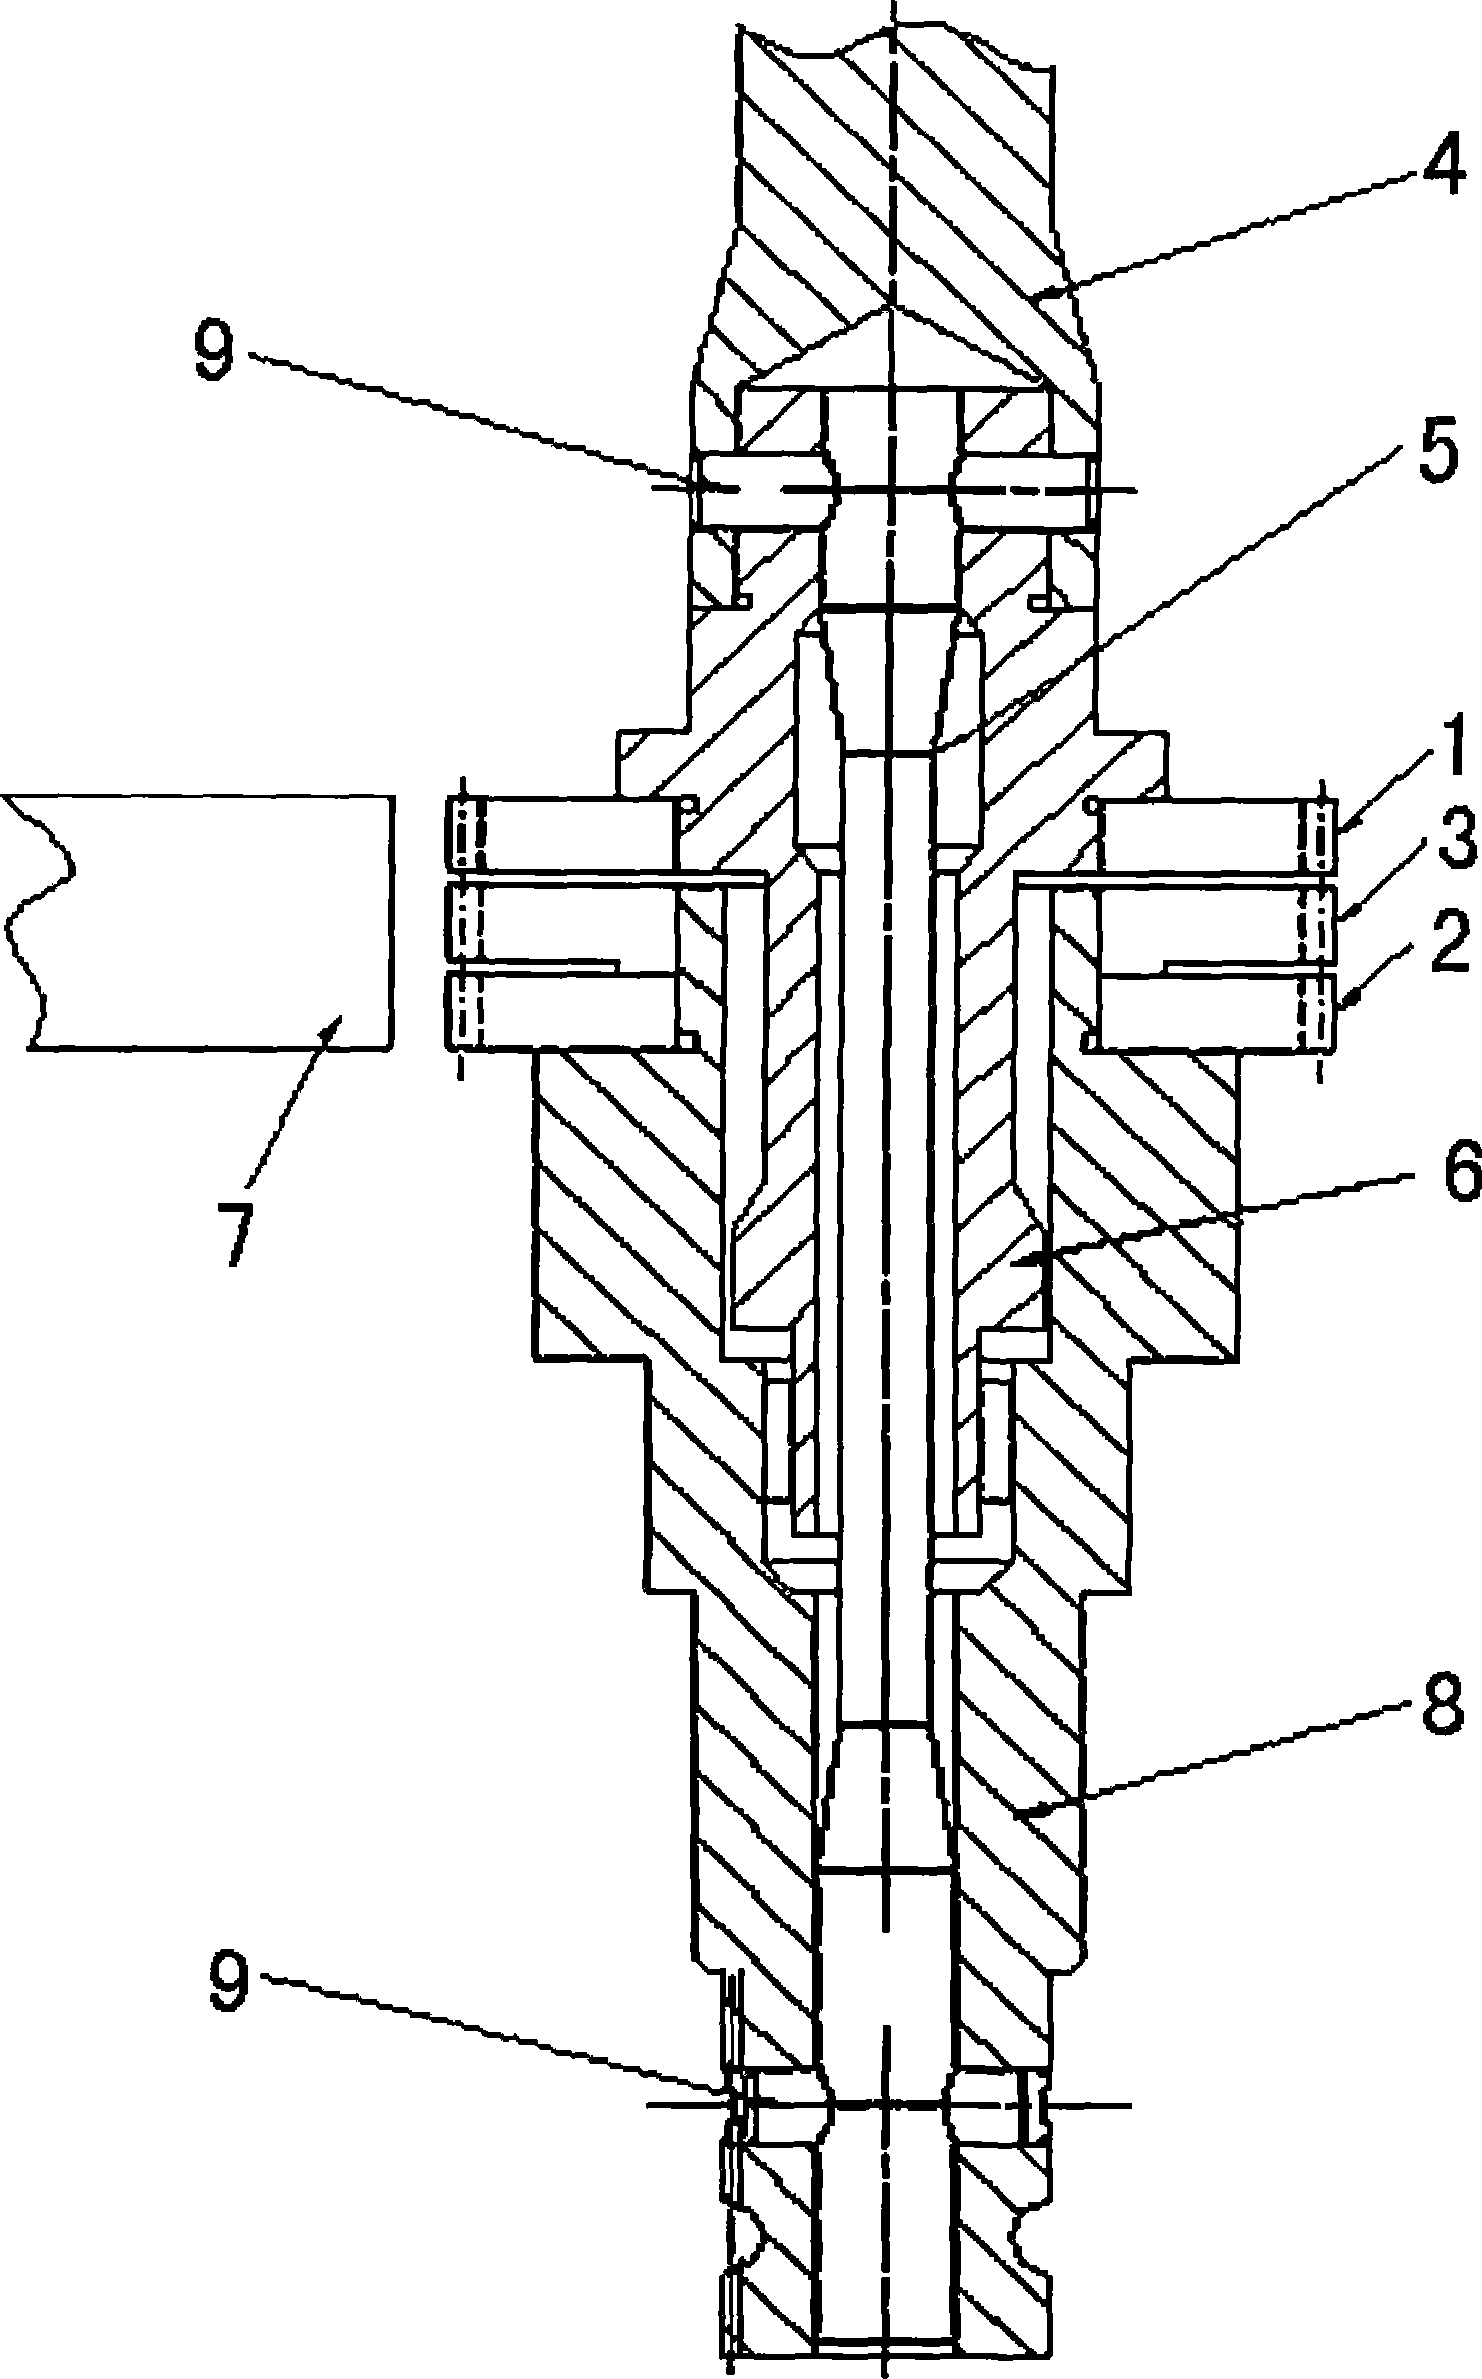 Steering sensor capable of simultaneously measuring steering angle and torque